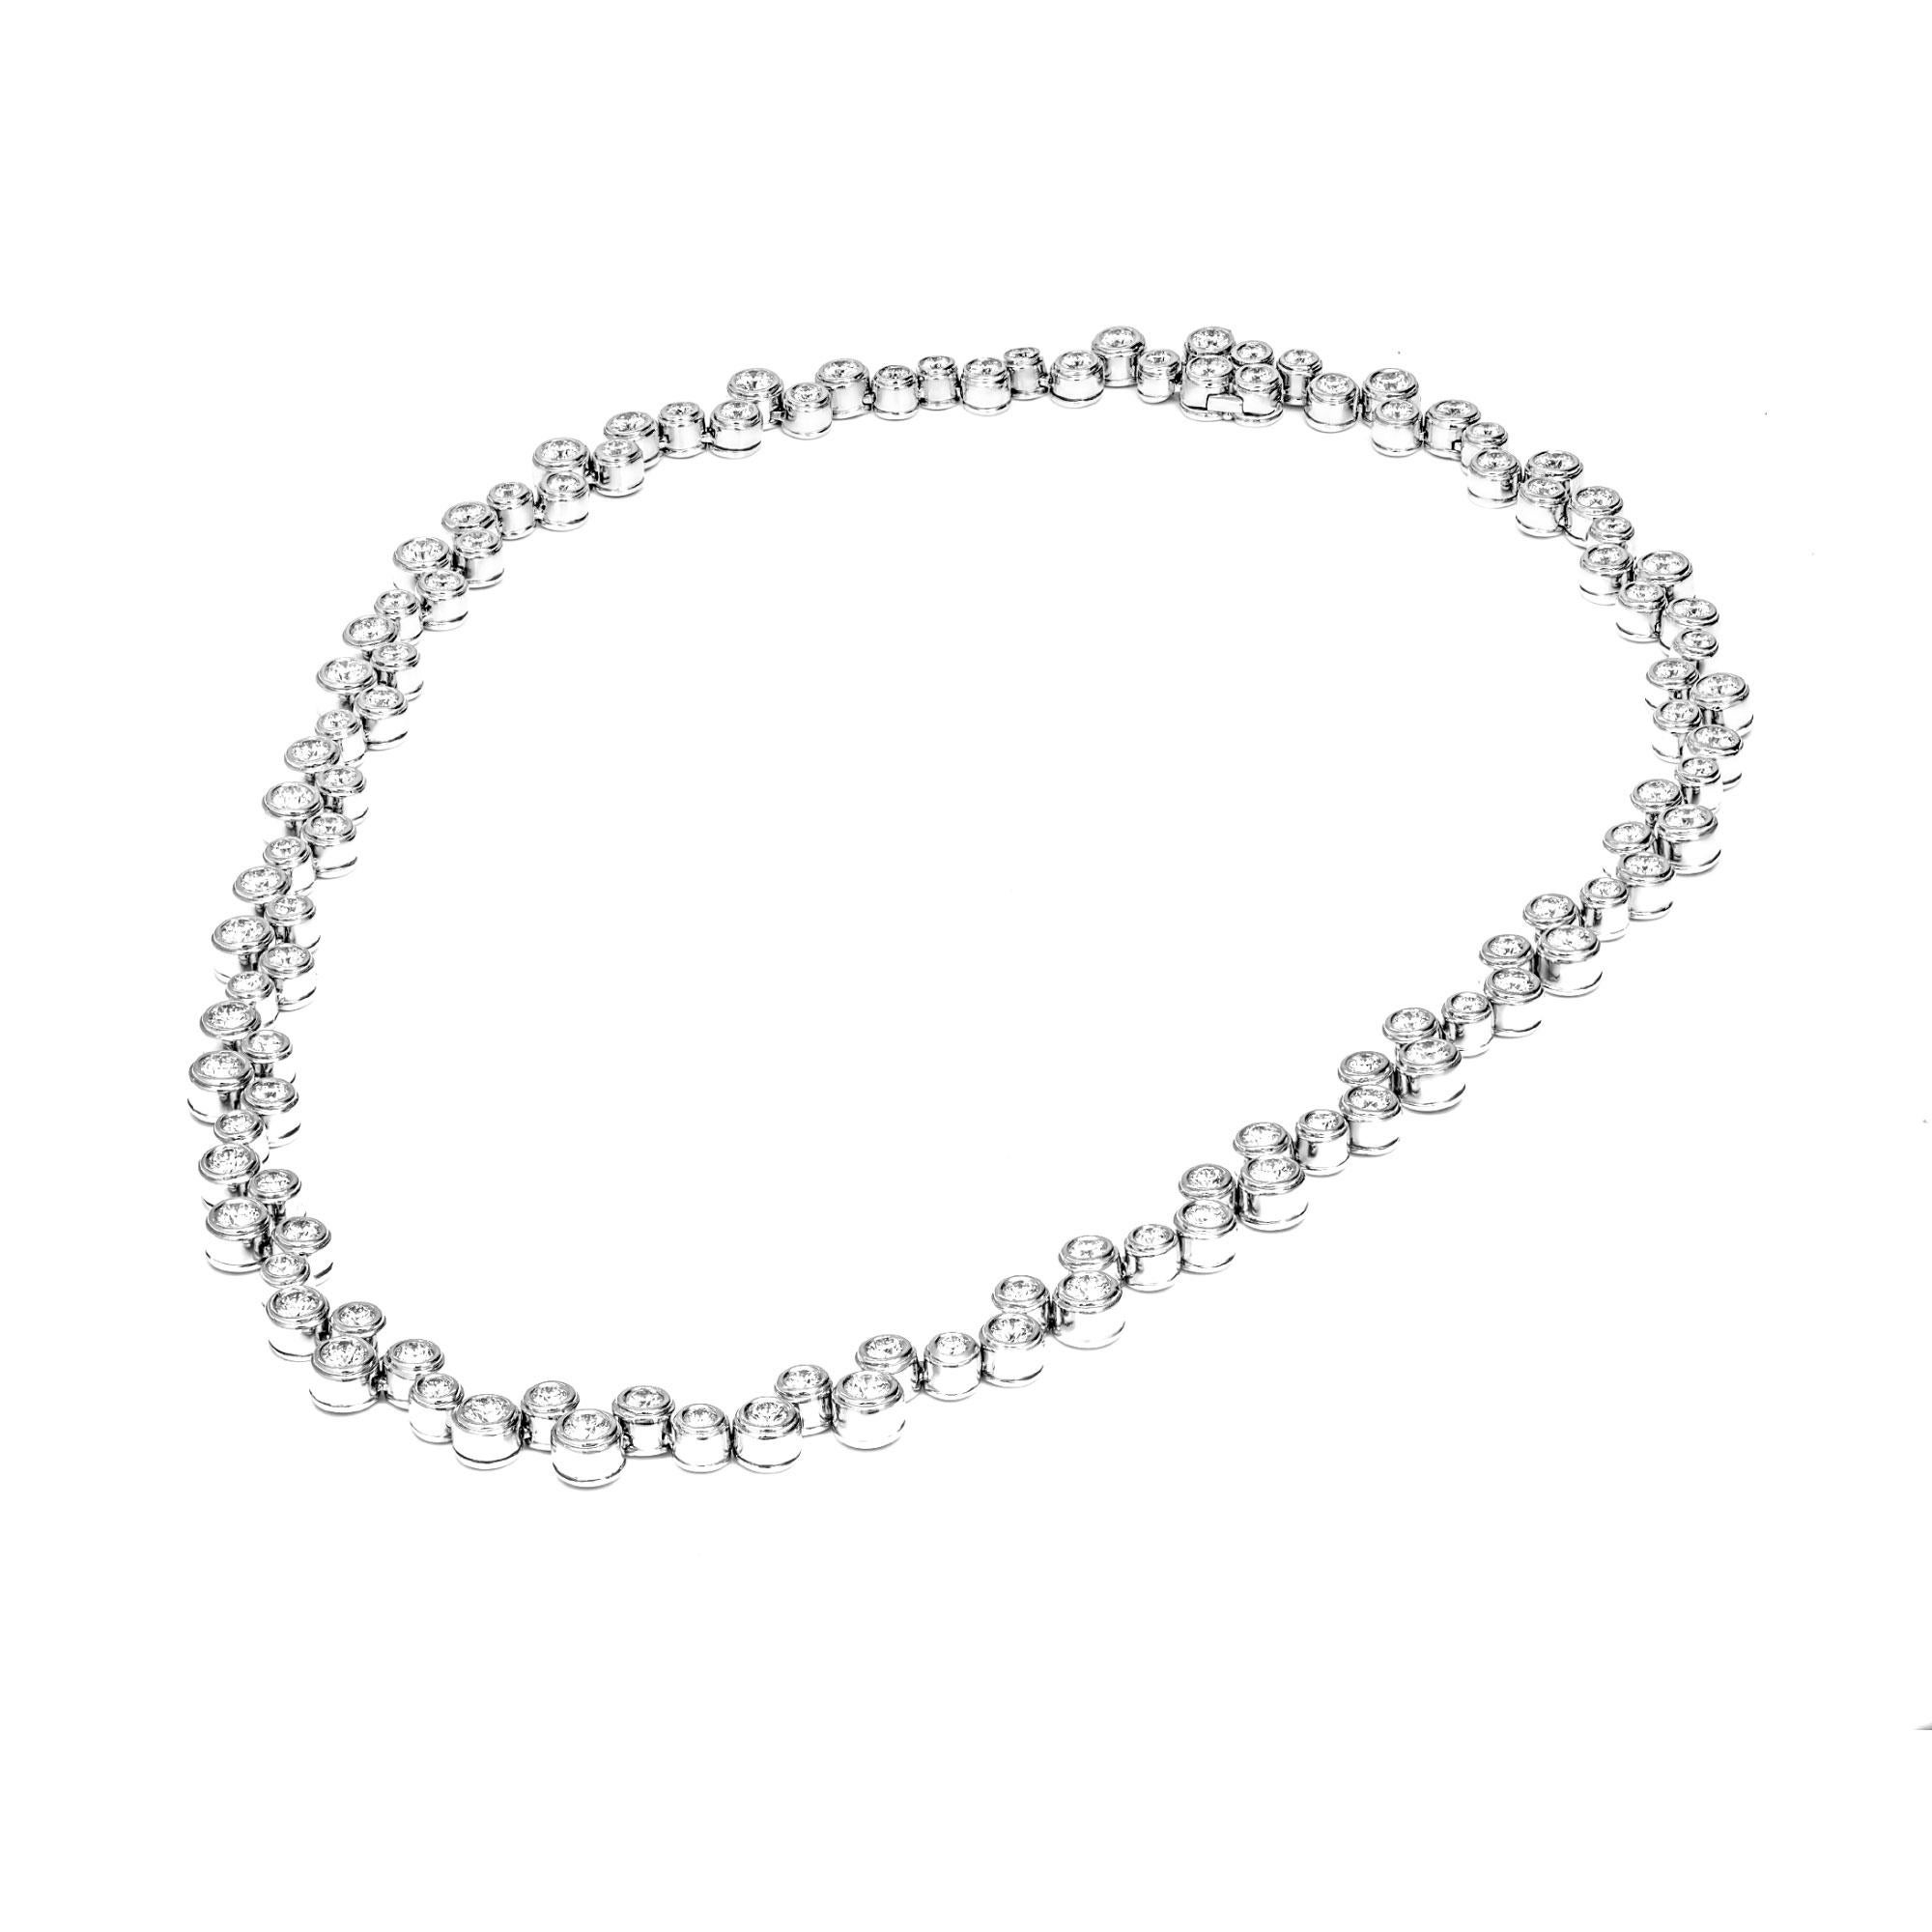 Tiffany & Co. Bubbles Platinum Diamond Necklace
110 Round diamonds totaling approximately 10ct 
Mounted in Platinum 950
Stamped inside with original hallmark on the closing mechanism 